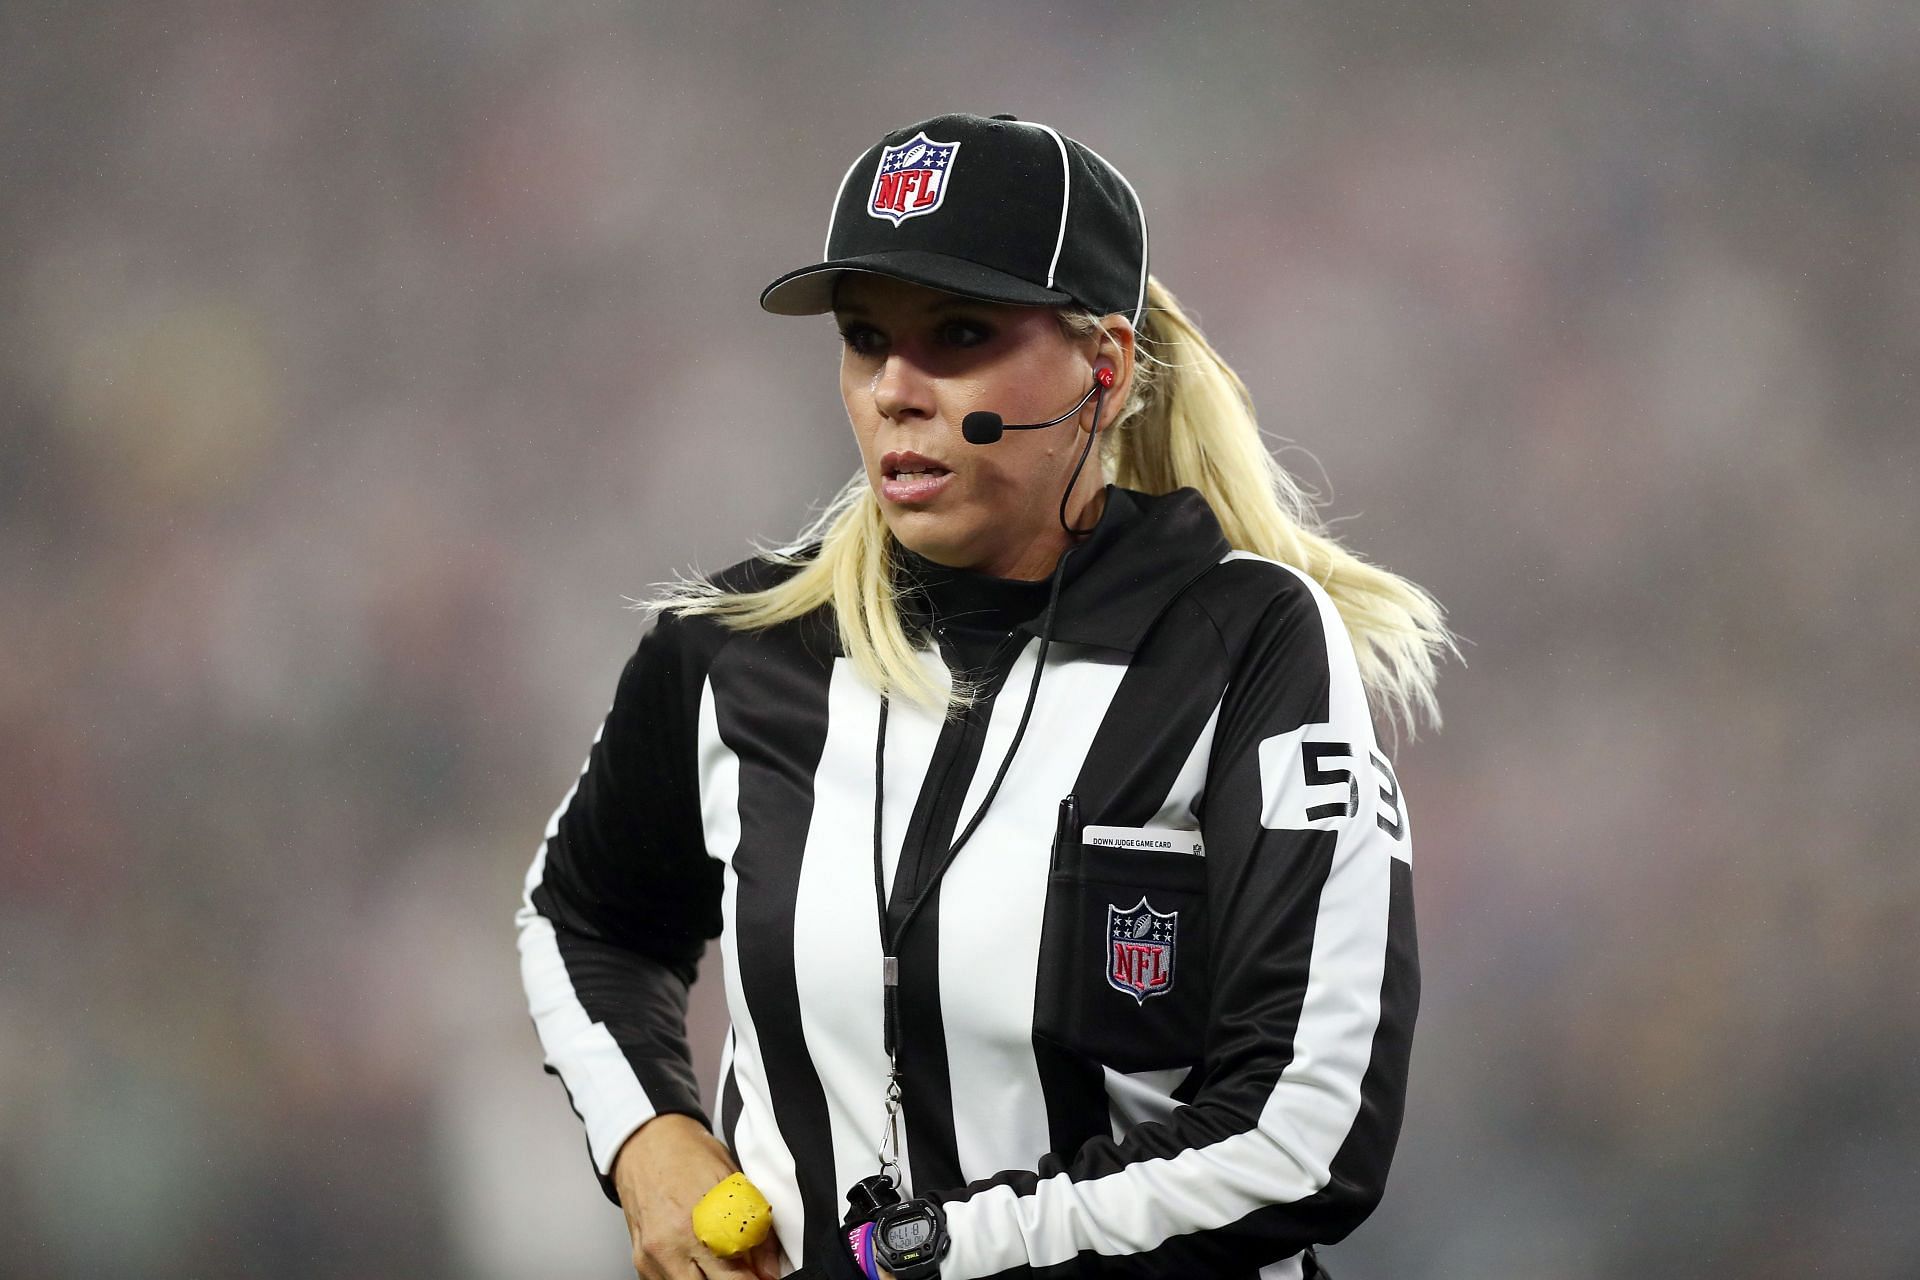 How many female referees are there in the NFL in the 2022 season?